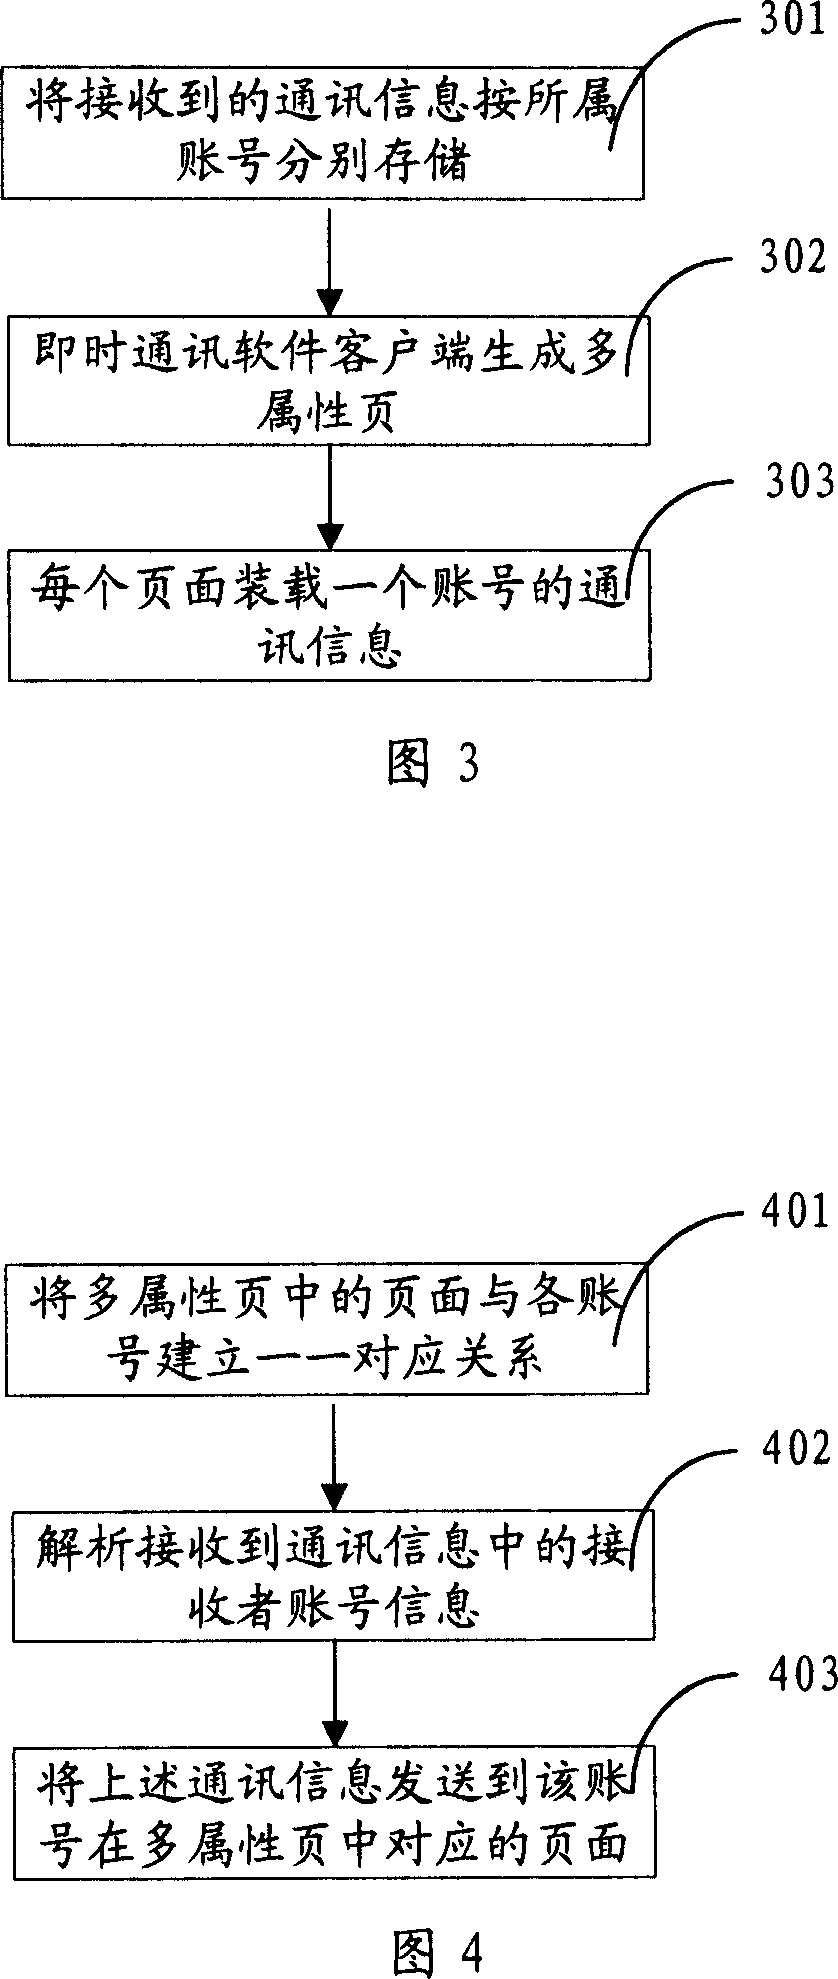 Method and system for multi-account log-in instant communication software